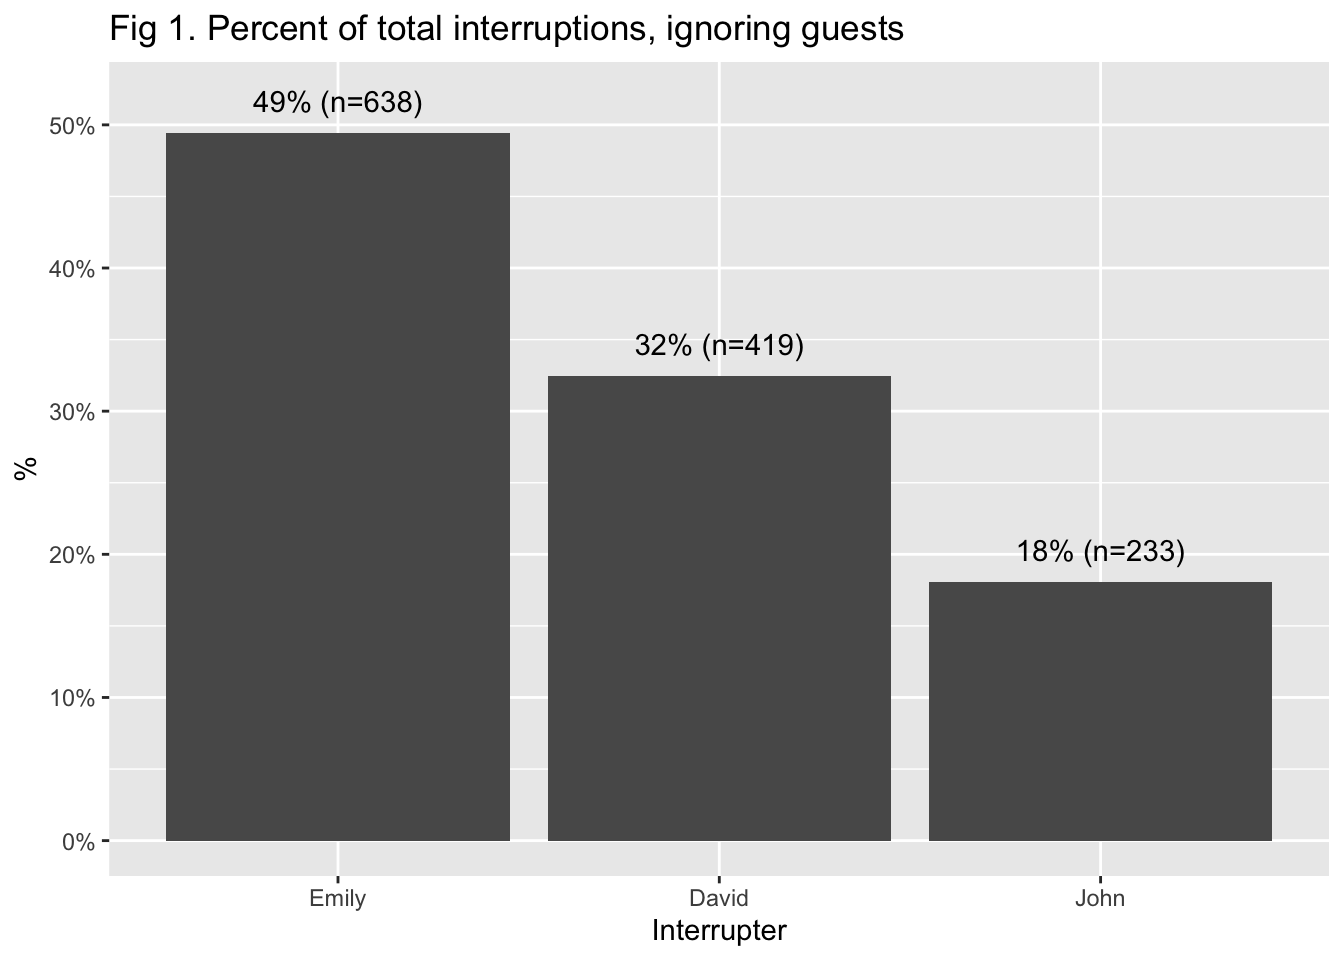 Figure 1 percent of total interruptions, ignoring guests. Shows Emily performs nearly half of all interruptions in the podcast.